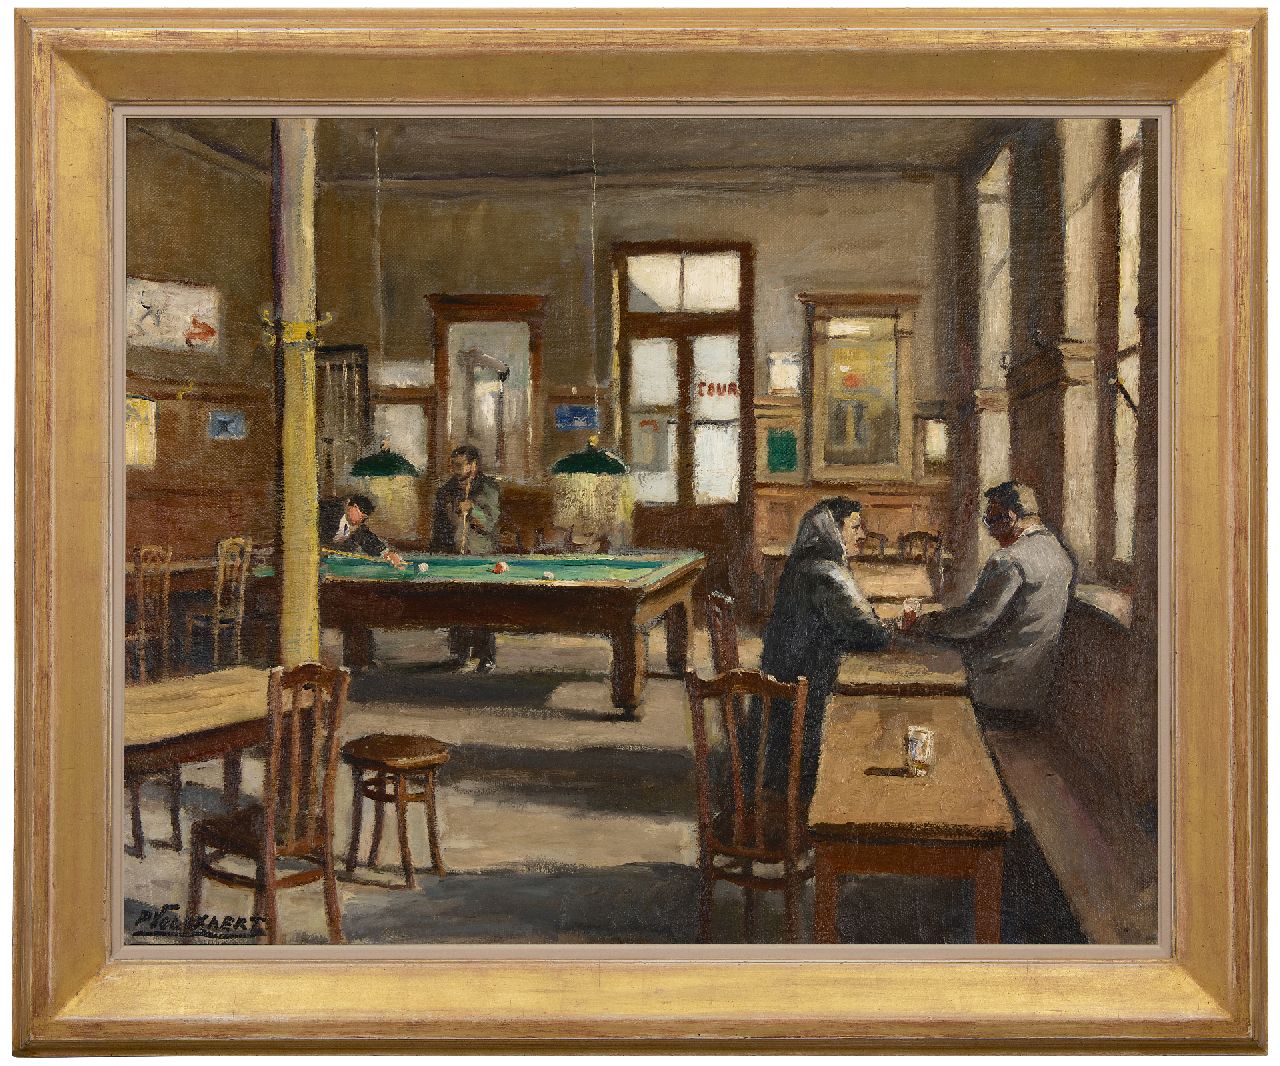 Volckaert P.  | Piet Volckaert | Paintings offered for sale | The billiard room of café Le Lievekenshoek in Brussels, oil on canvas 80.5 x 100.7 cm, signed l.l. and on the reverse